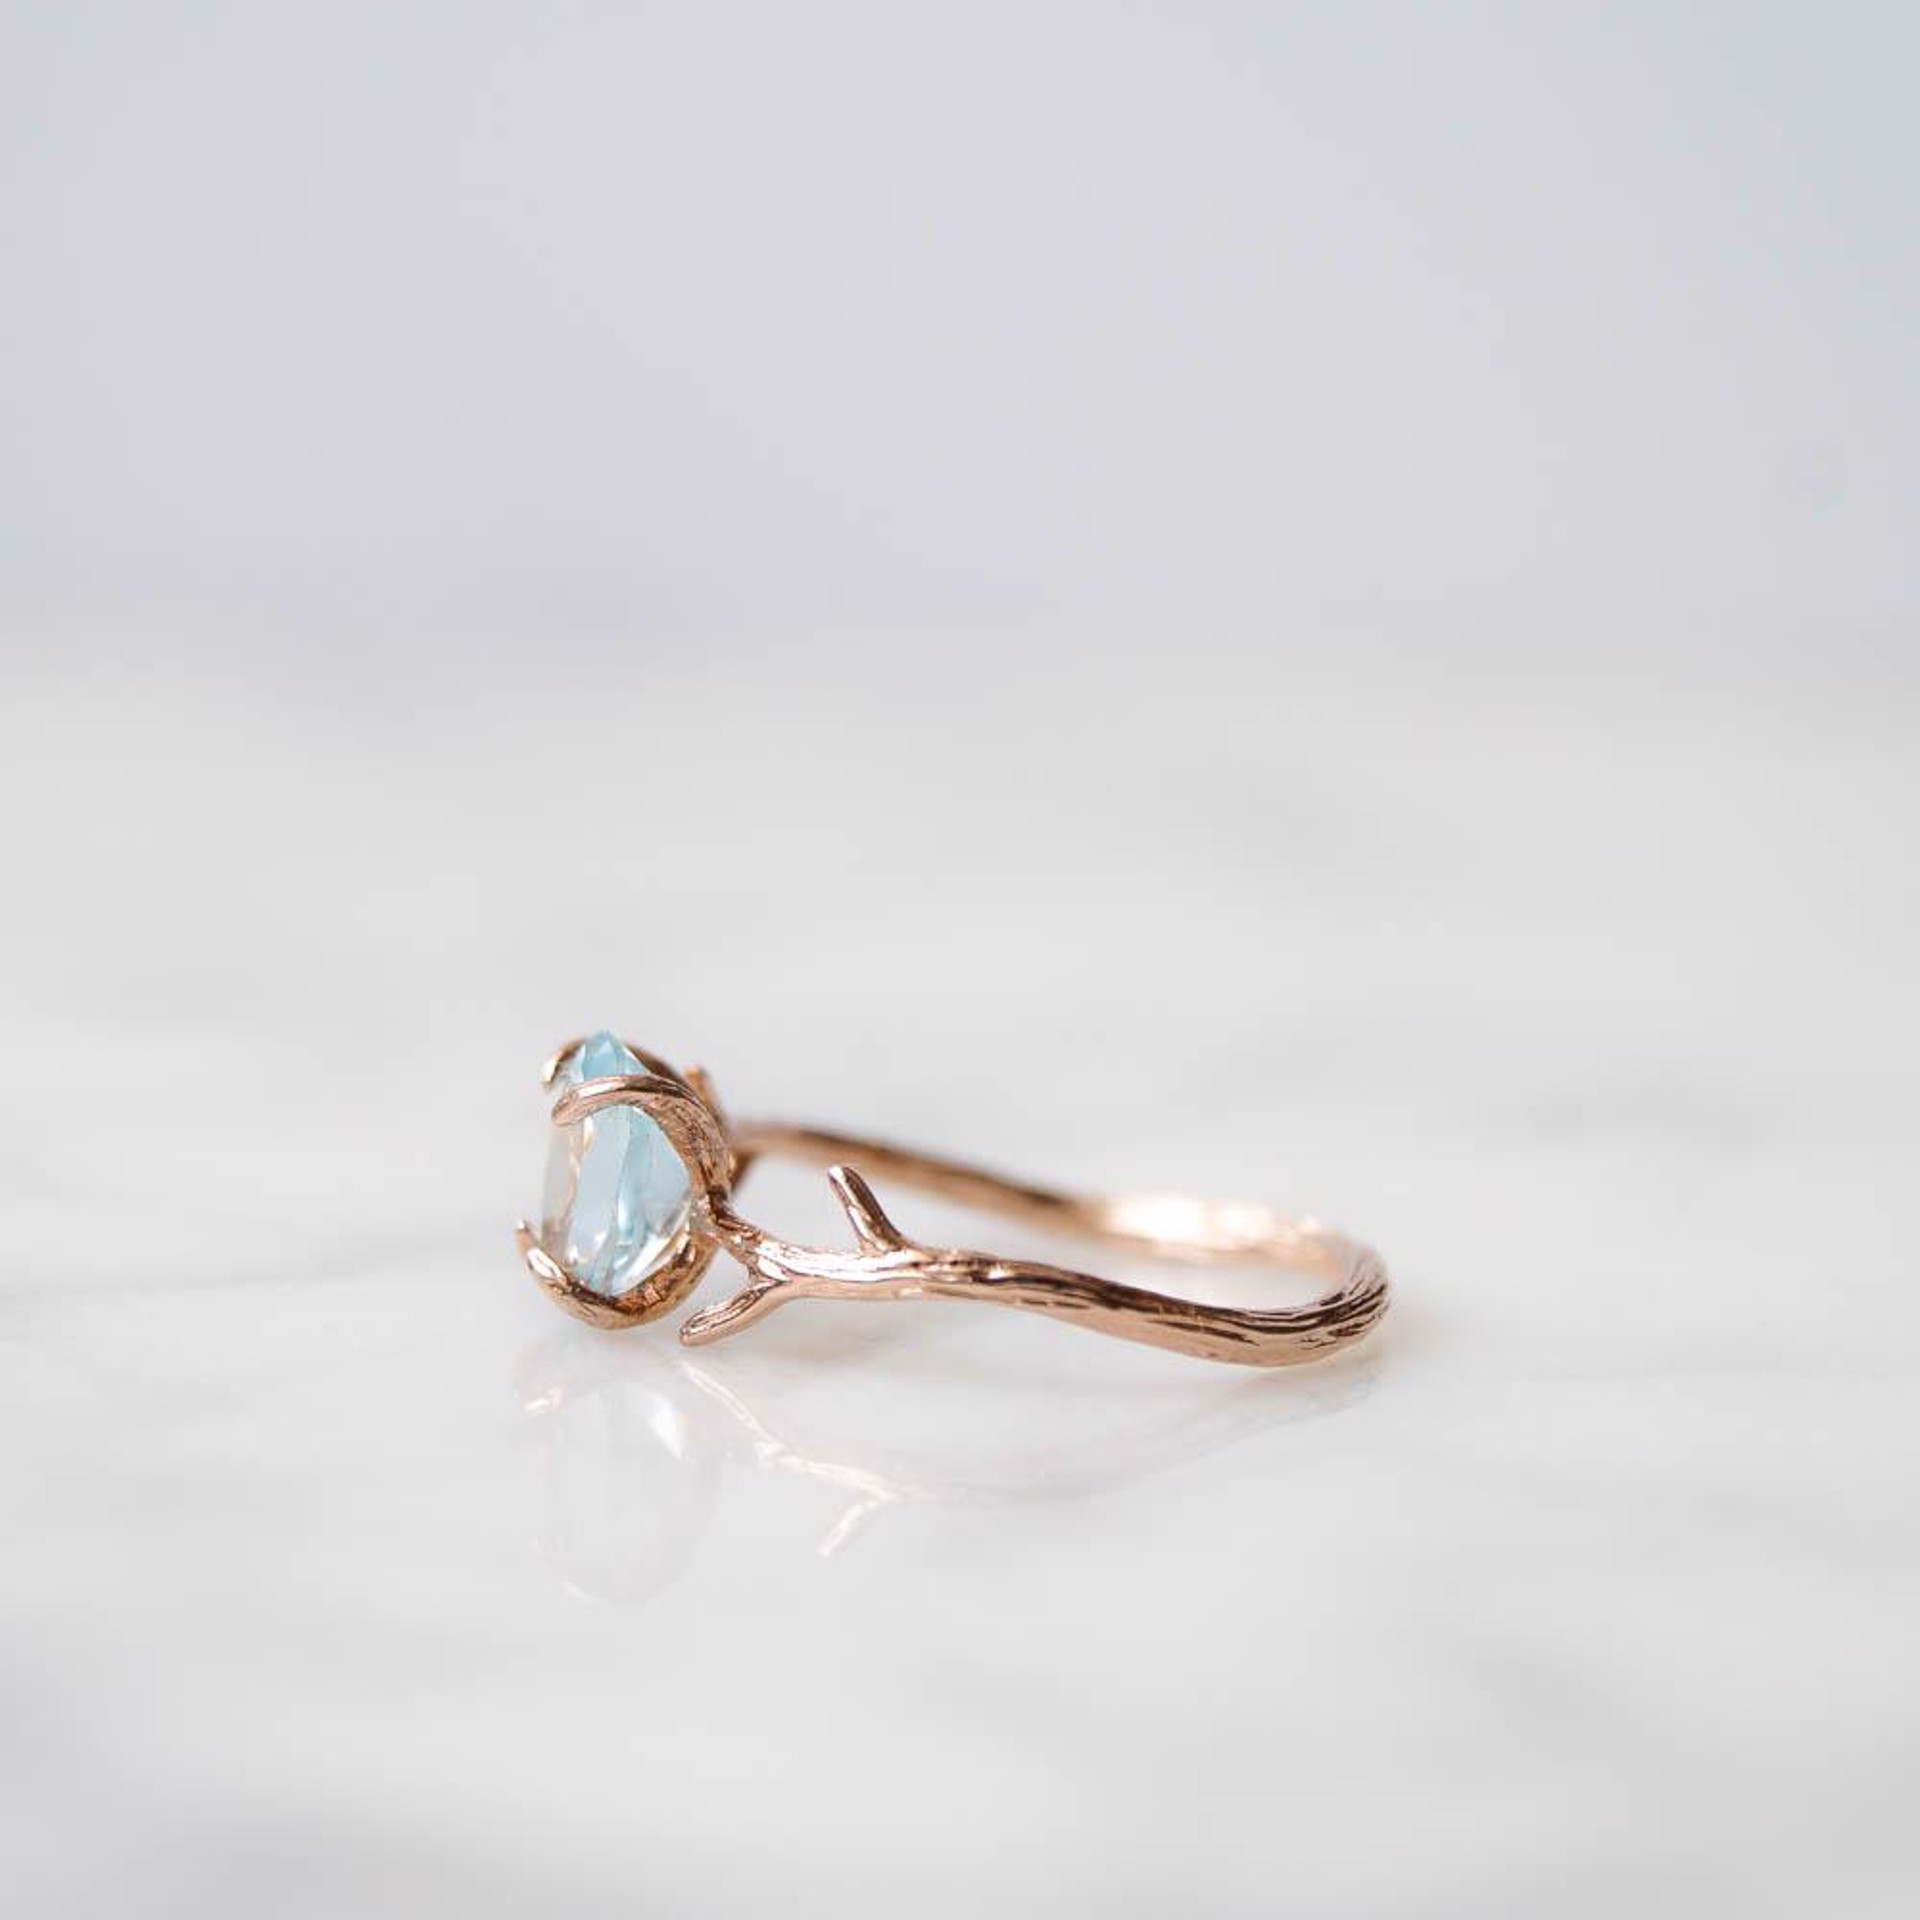 Blue Topaz Ring in Rose Gold (Size 8) by Wander + Lust Jewelry